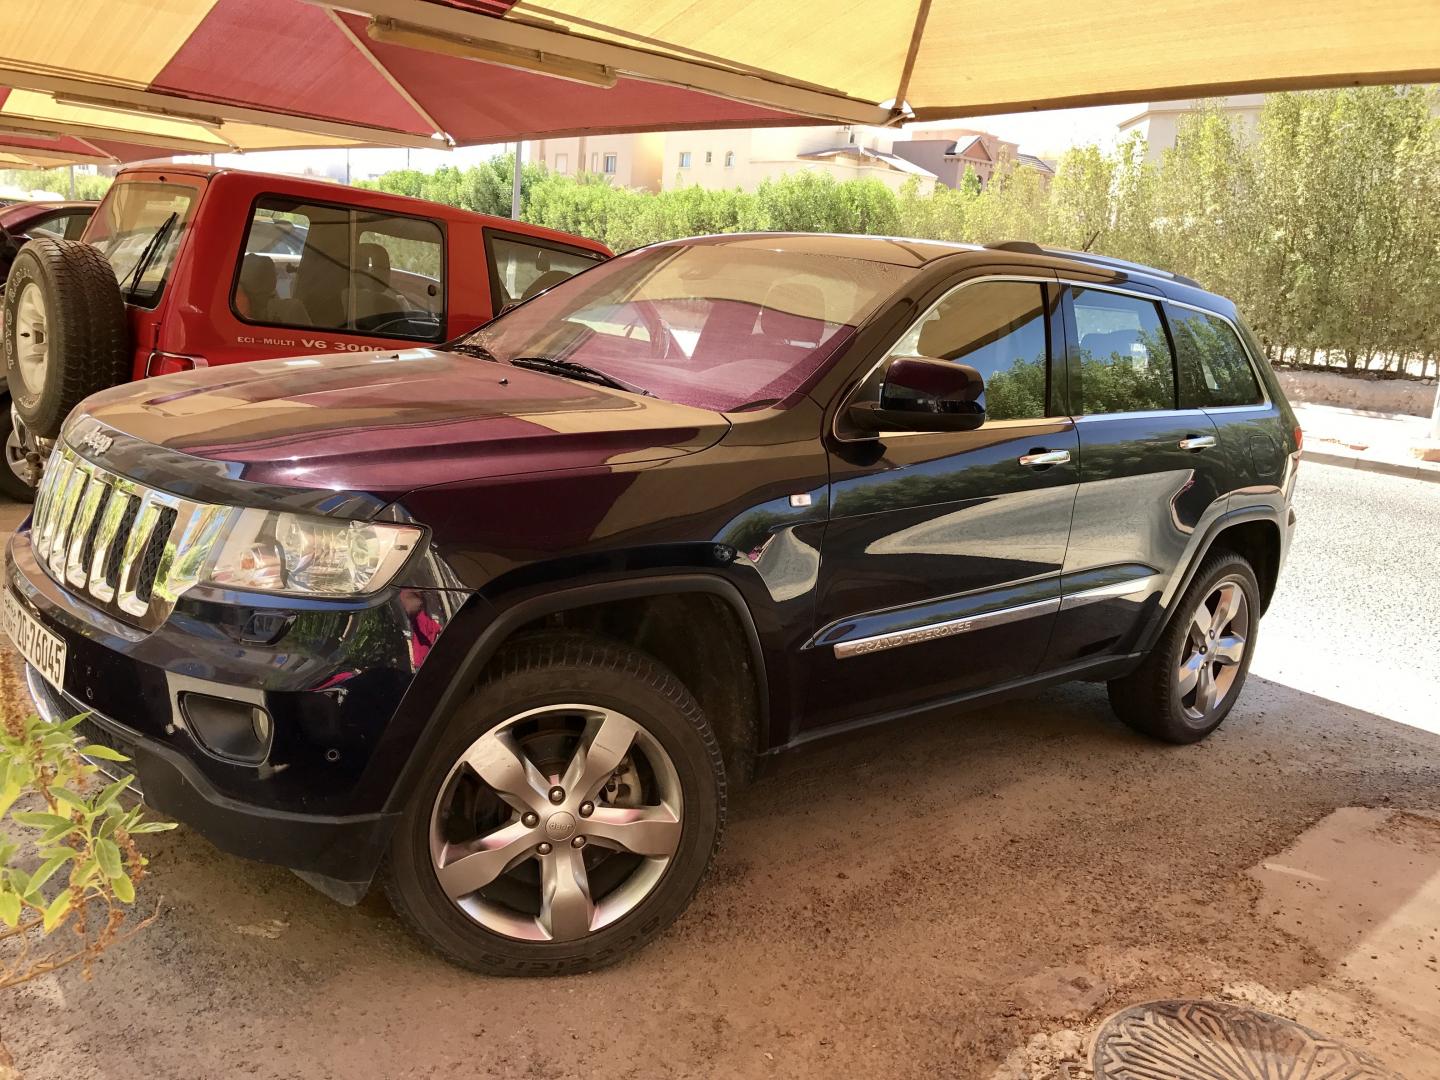  Jeep Grand Cherokee, 2012, automatic, 91 K, For Sale - / Overland edition